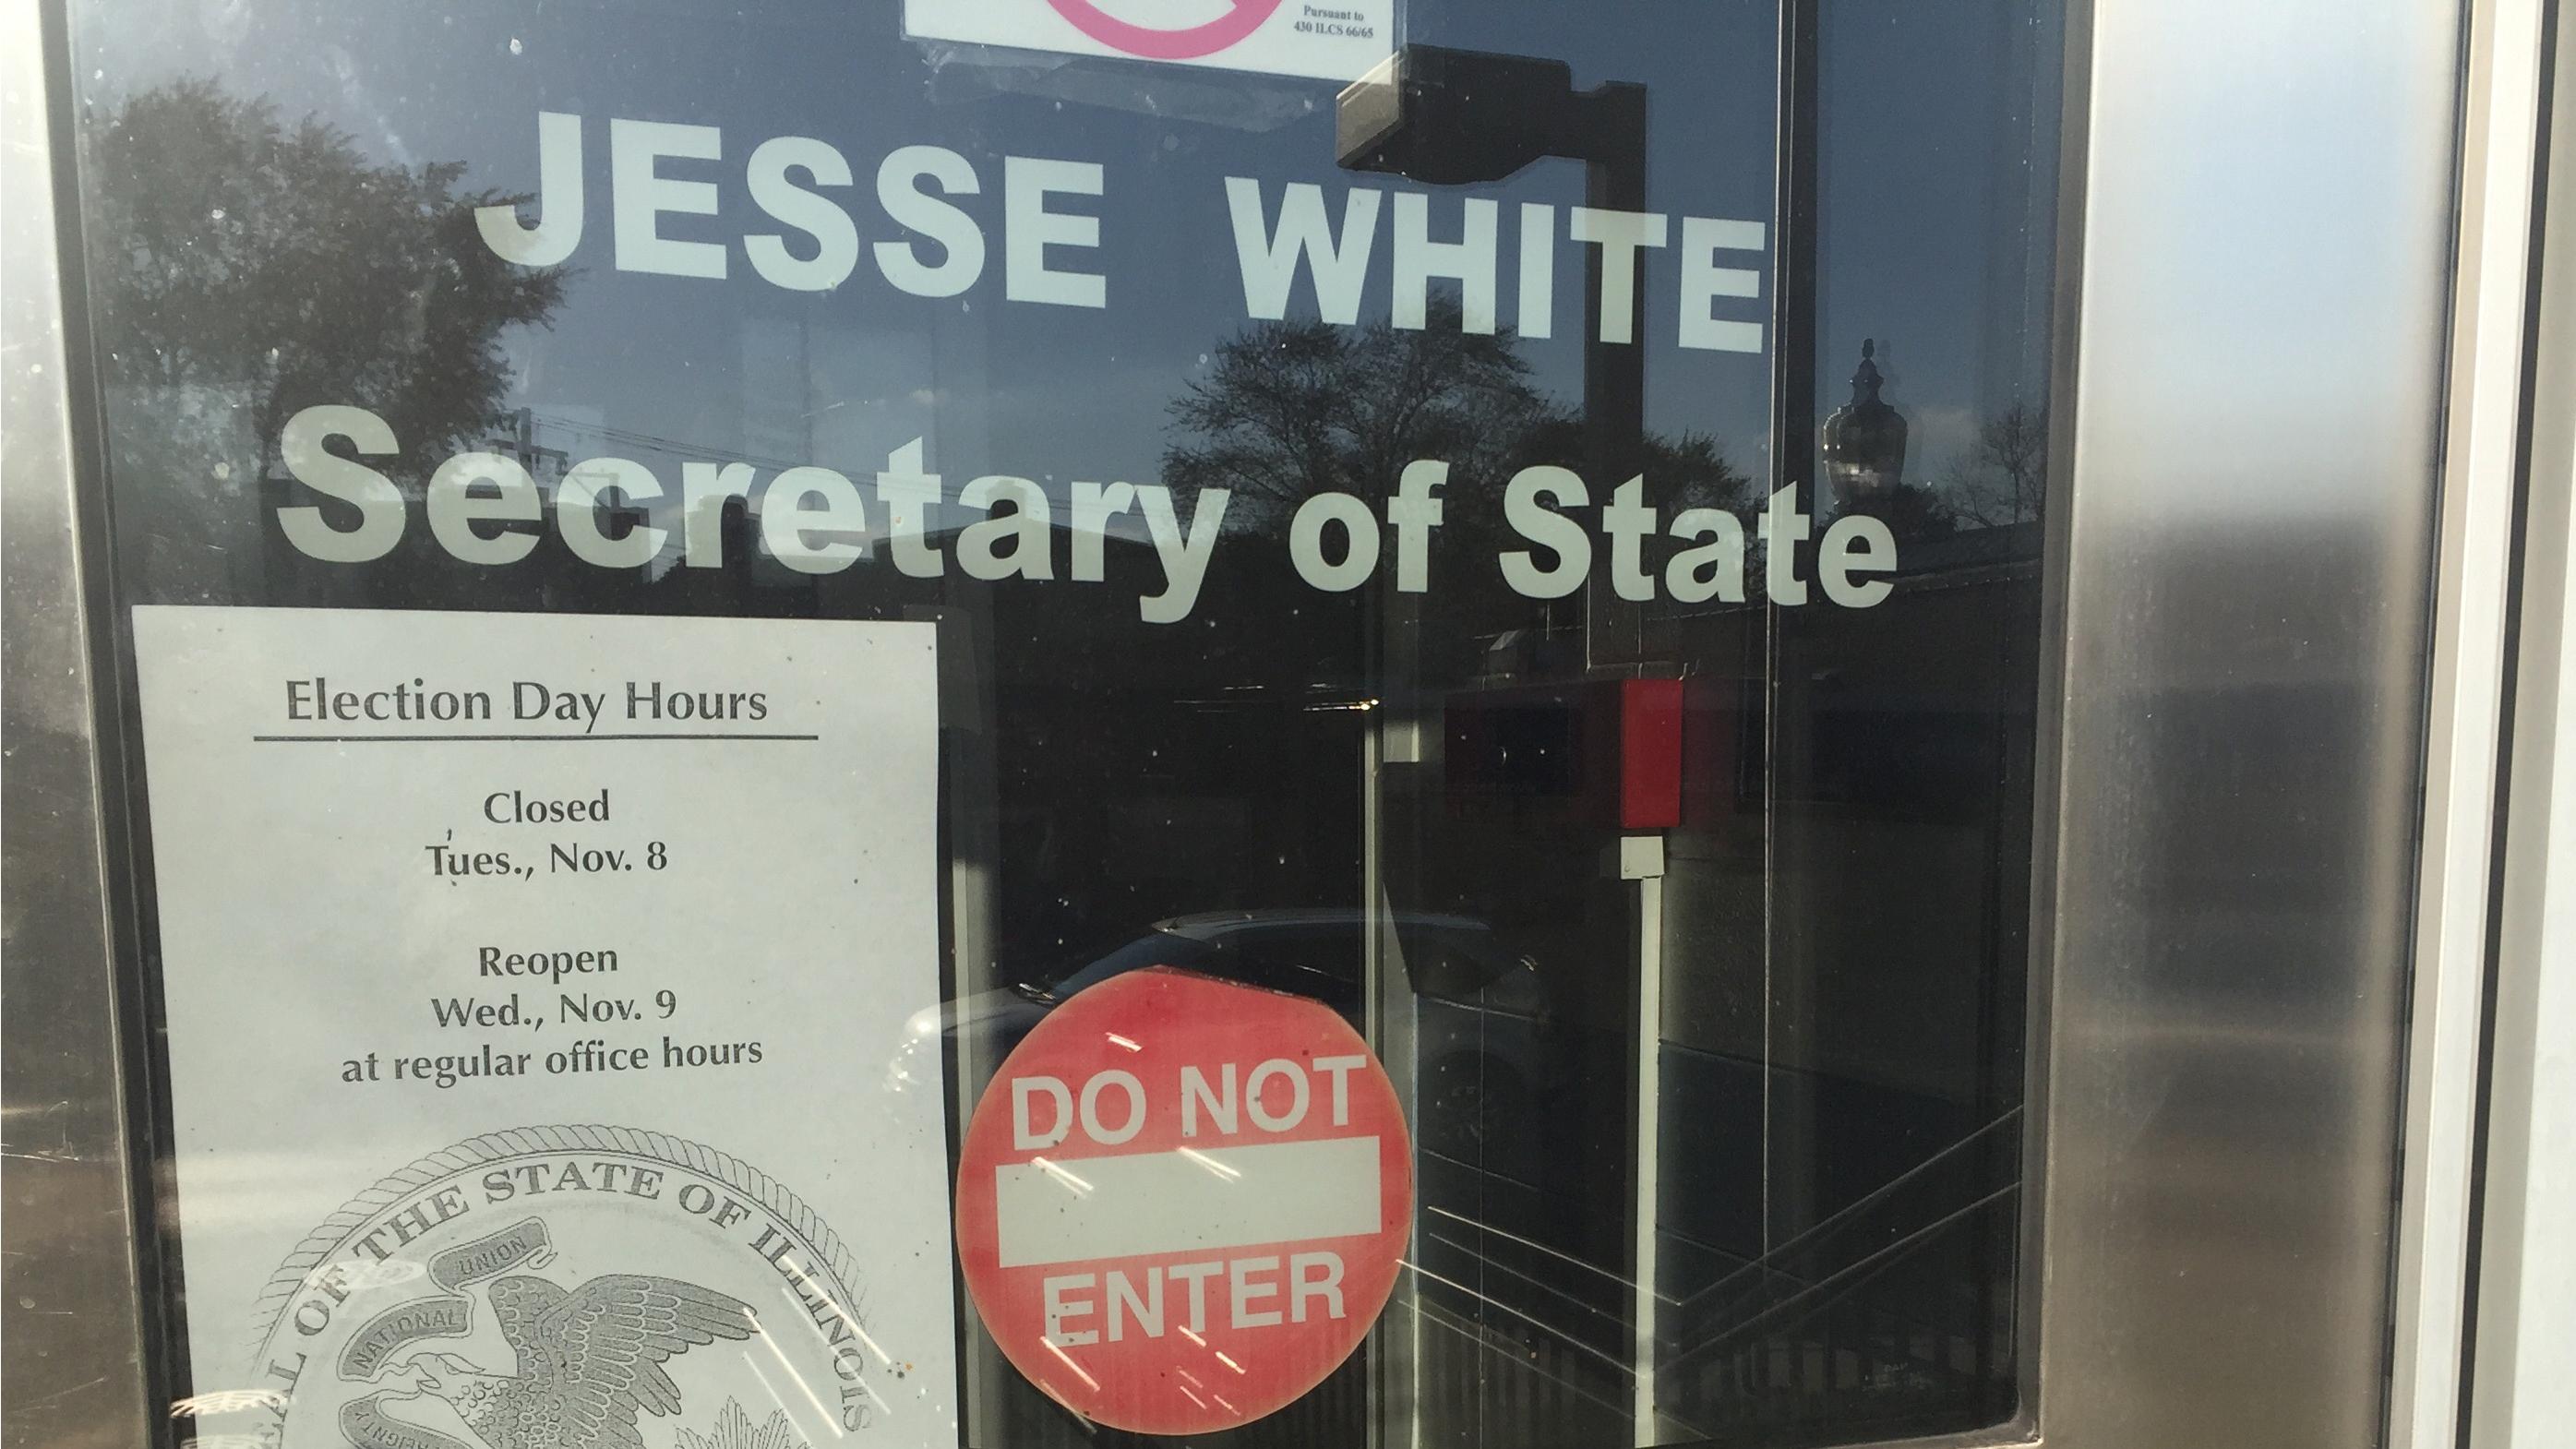 A sign at the Chicago North Secretary of State Facility, located at 5401 N. Elston Ave., announces the office is closed until Wednesday. (Paris Schutz / Chicago Tonight)